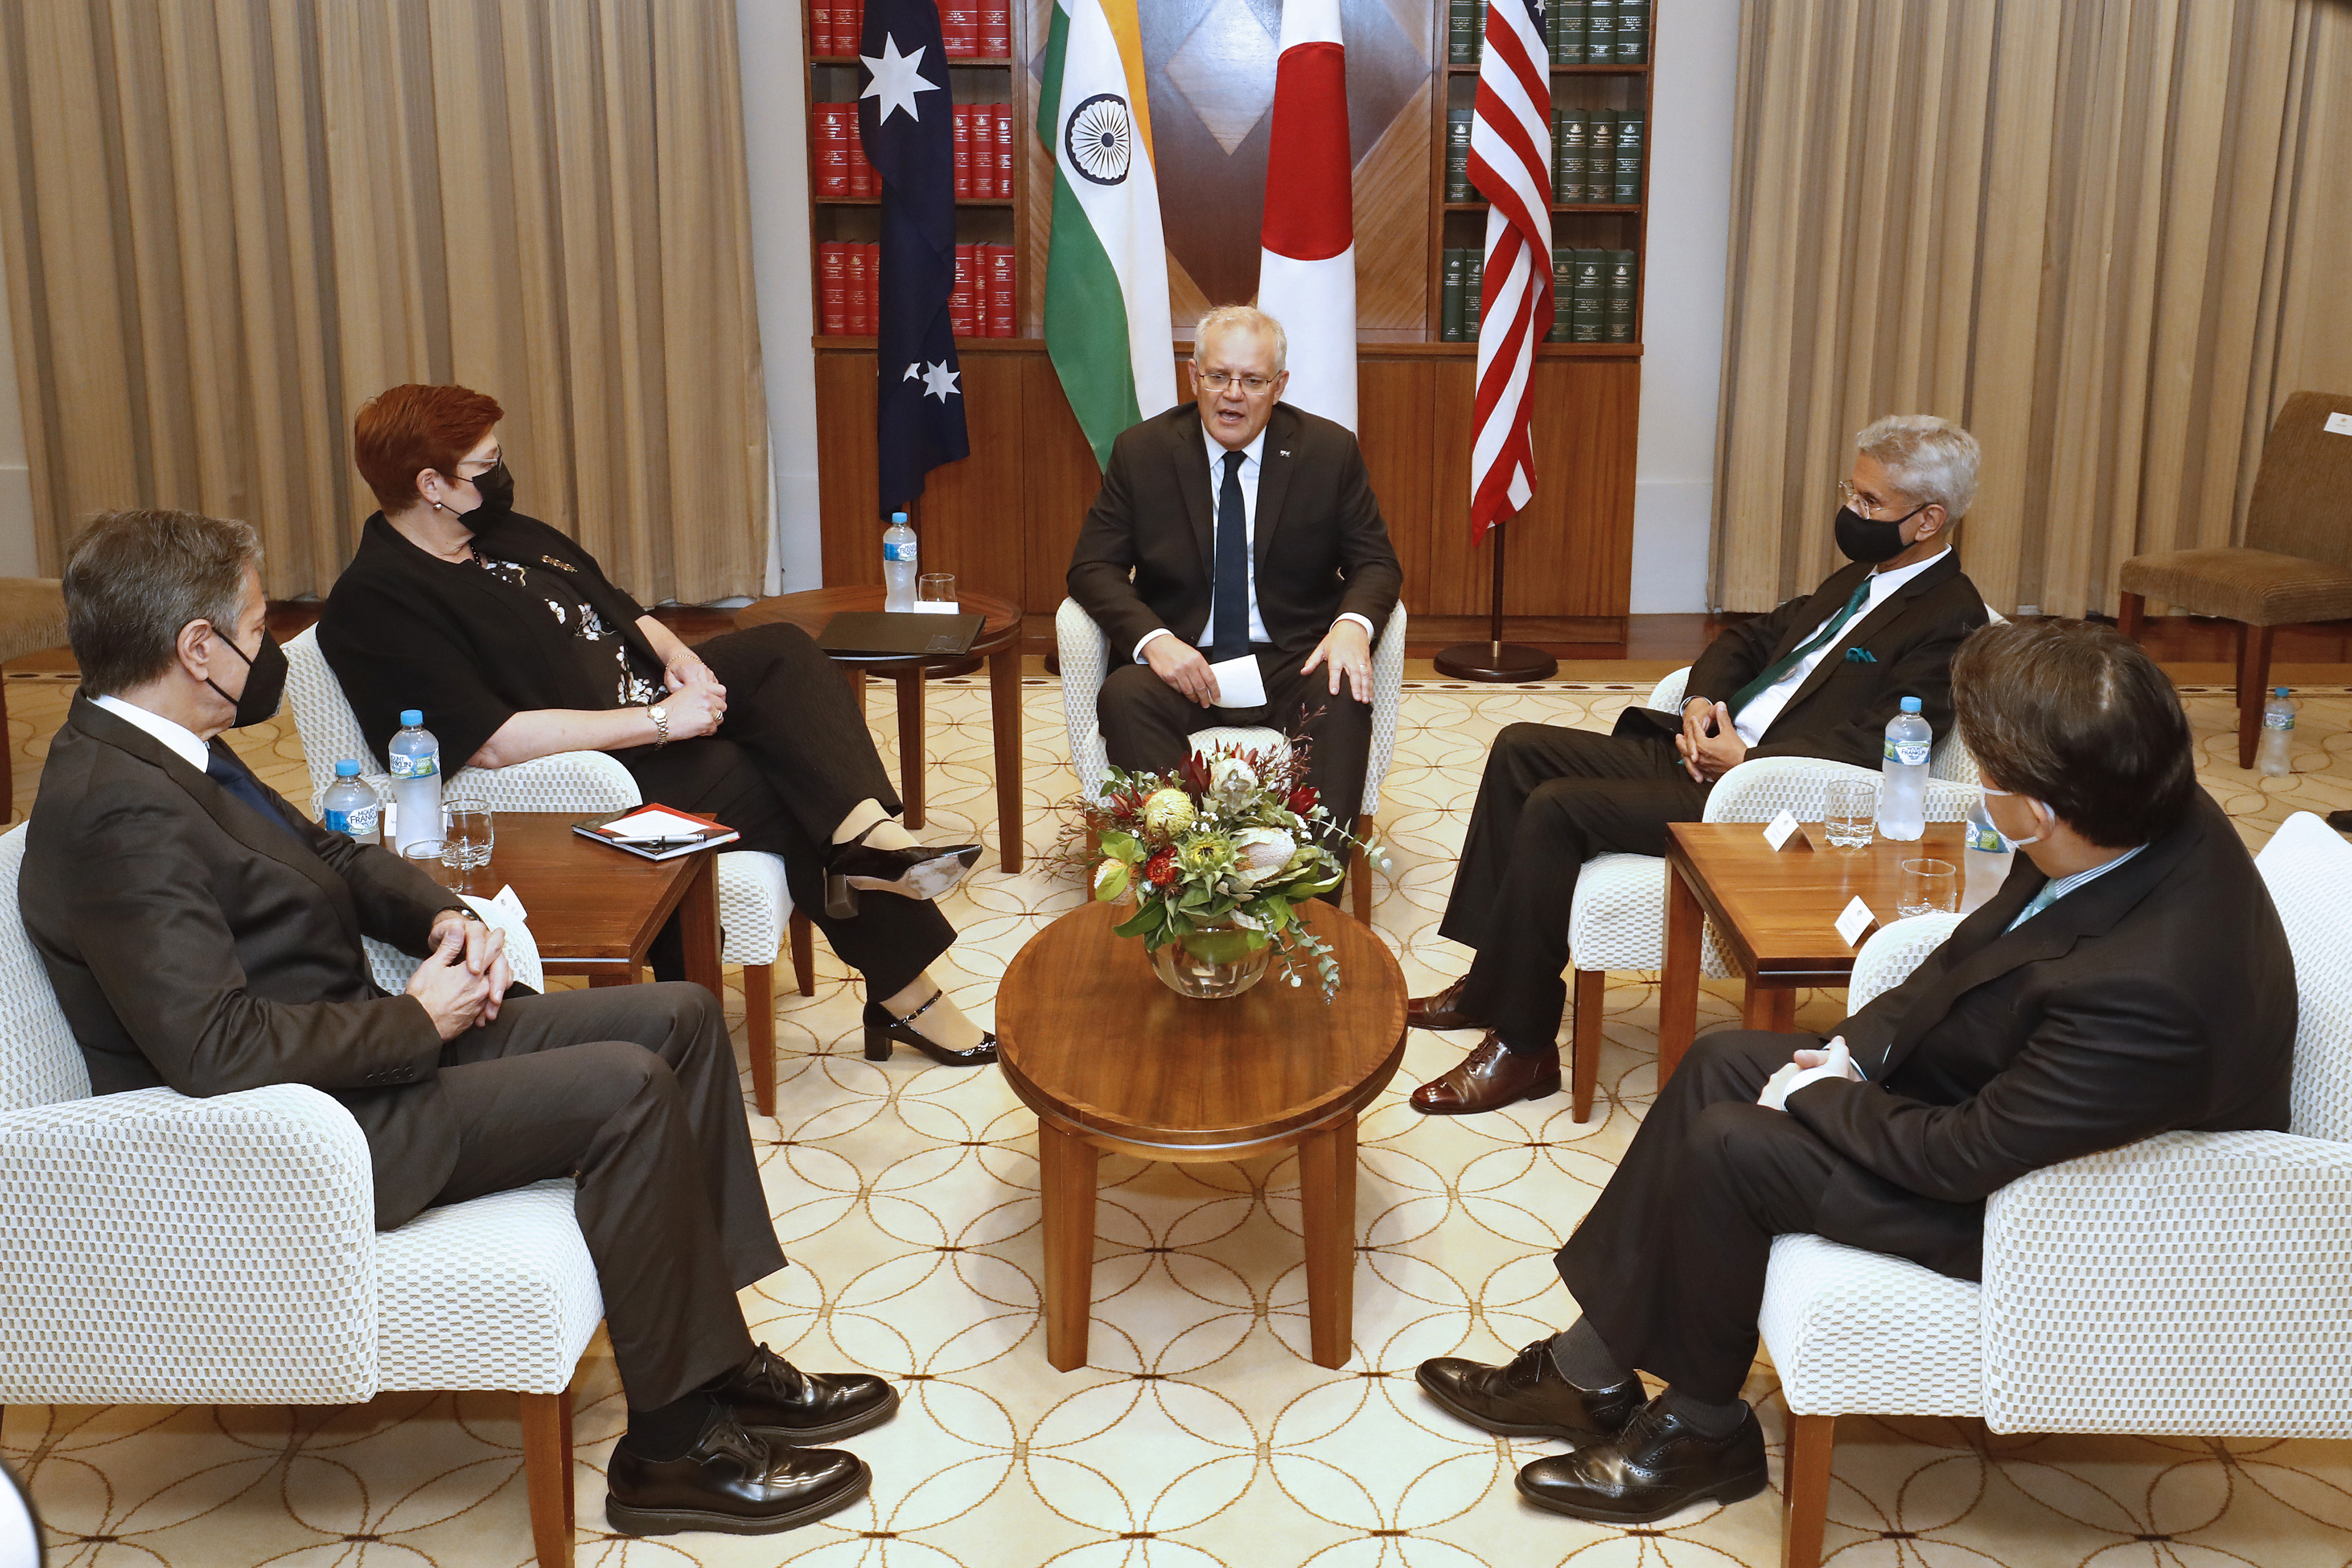 A meeting of Quad members – a bloc of Indo-Pacific democracies created to counter China’s regional influence. Photo: AP